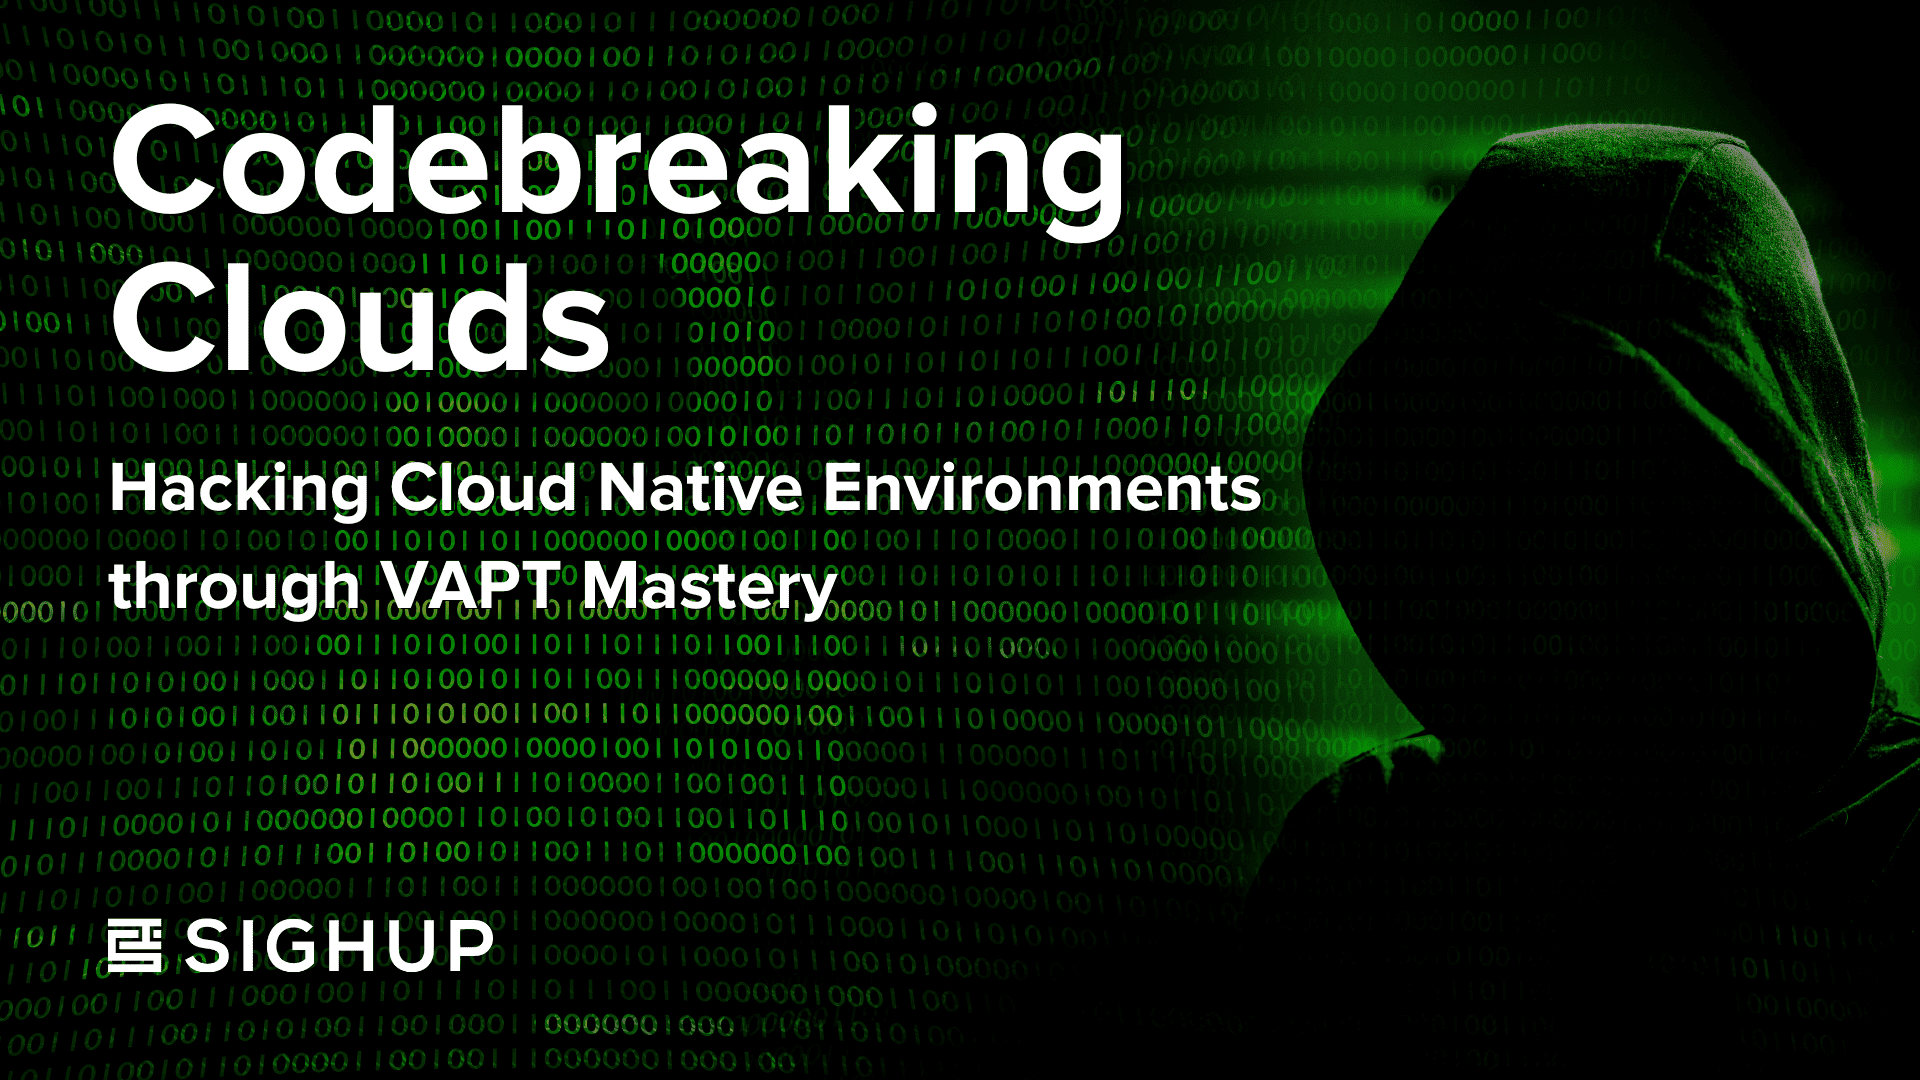 Codebreaking clouds: hacking cloud native environments through VAPT mastery